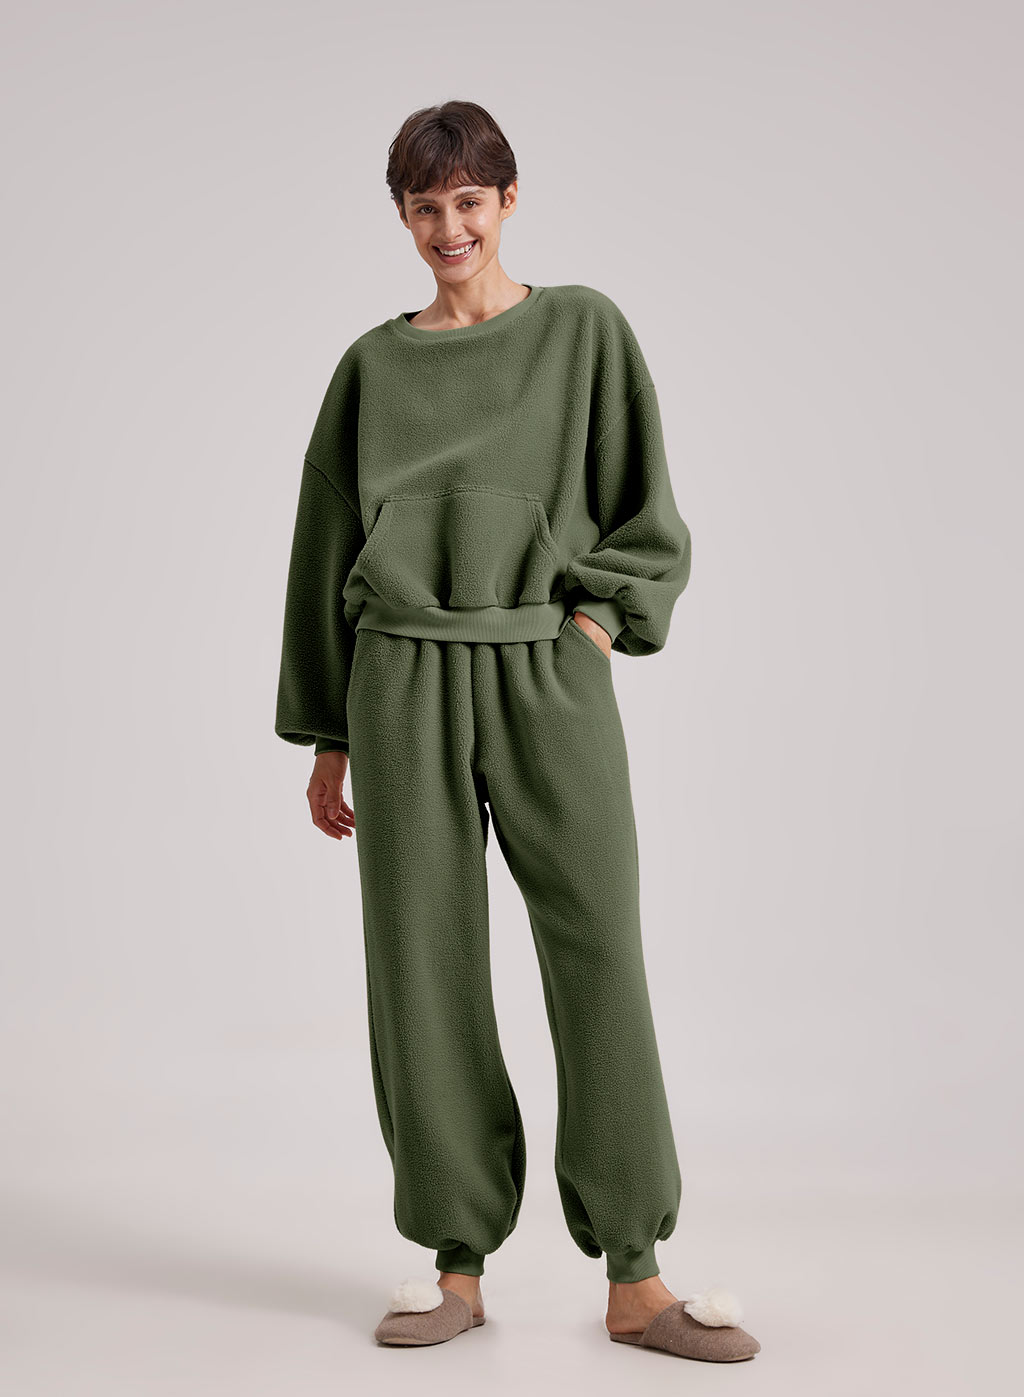 10 of Our Fall-Favorite Sweatsuits - V Magazine